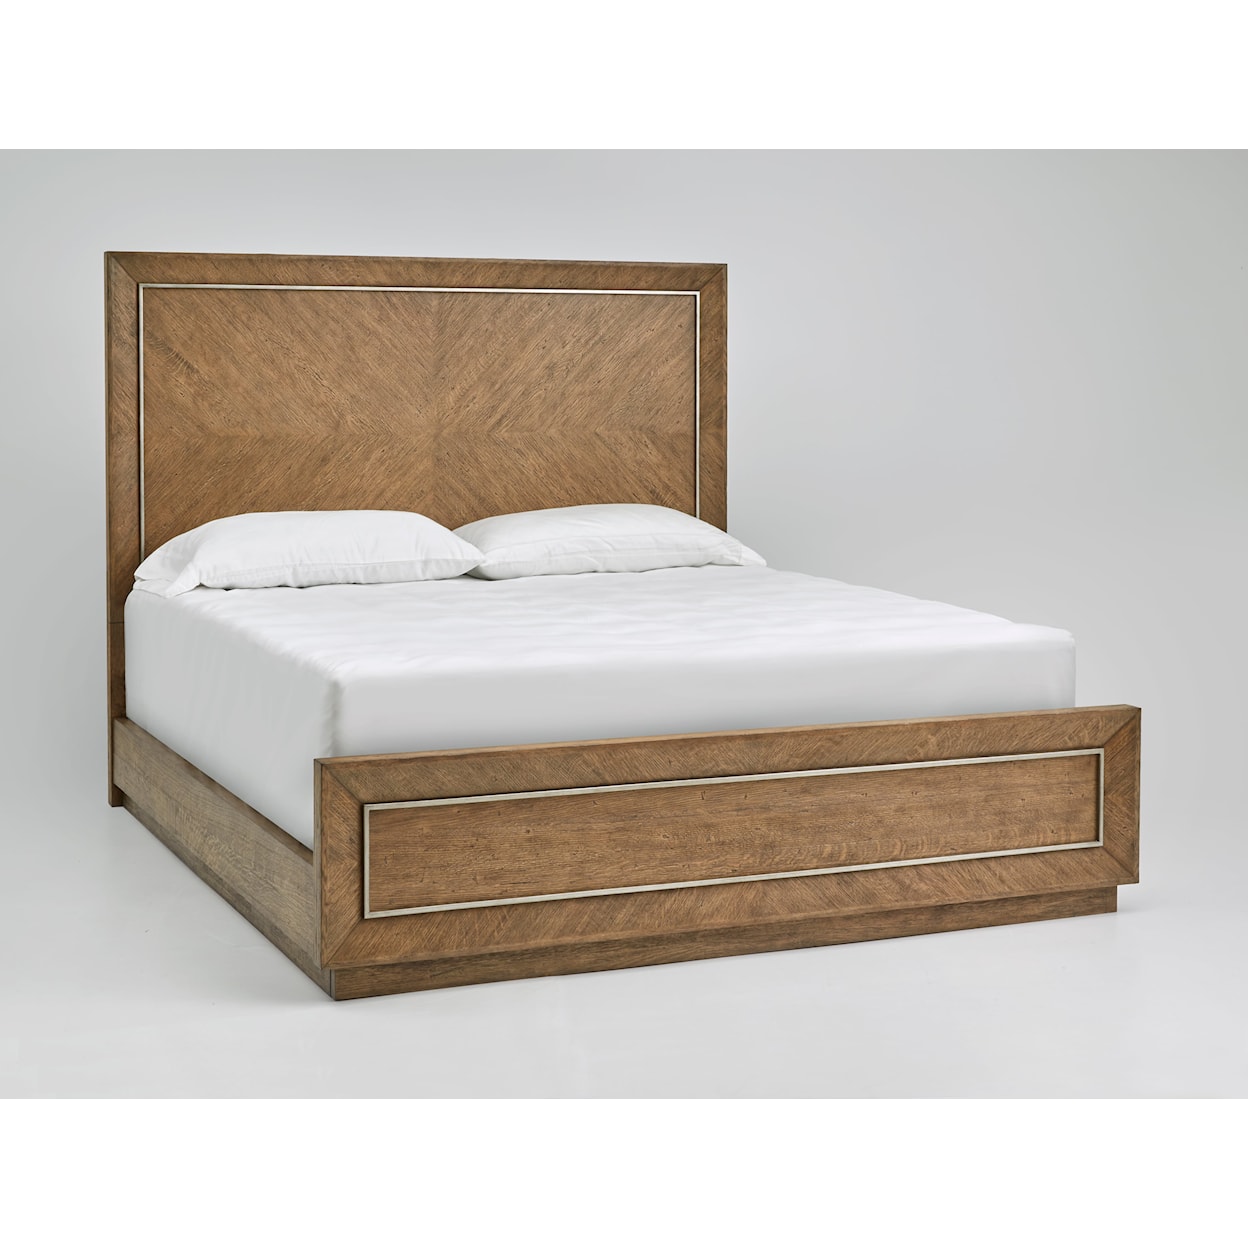 The Preserve Sugarland Cali. King Panel Bed